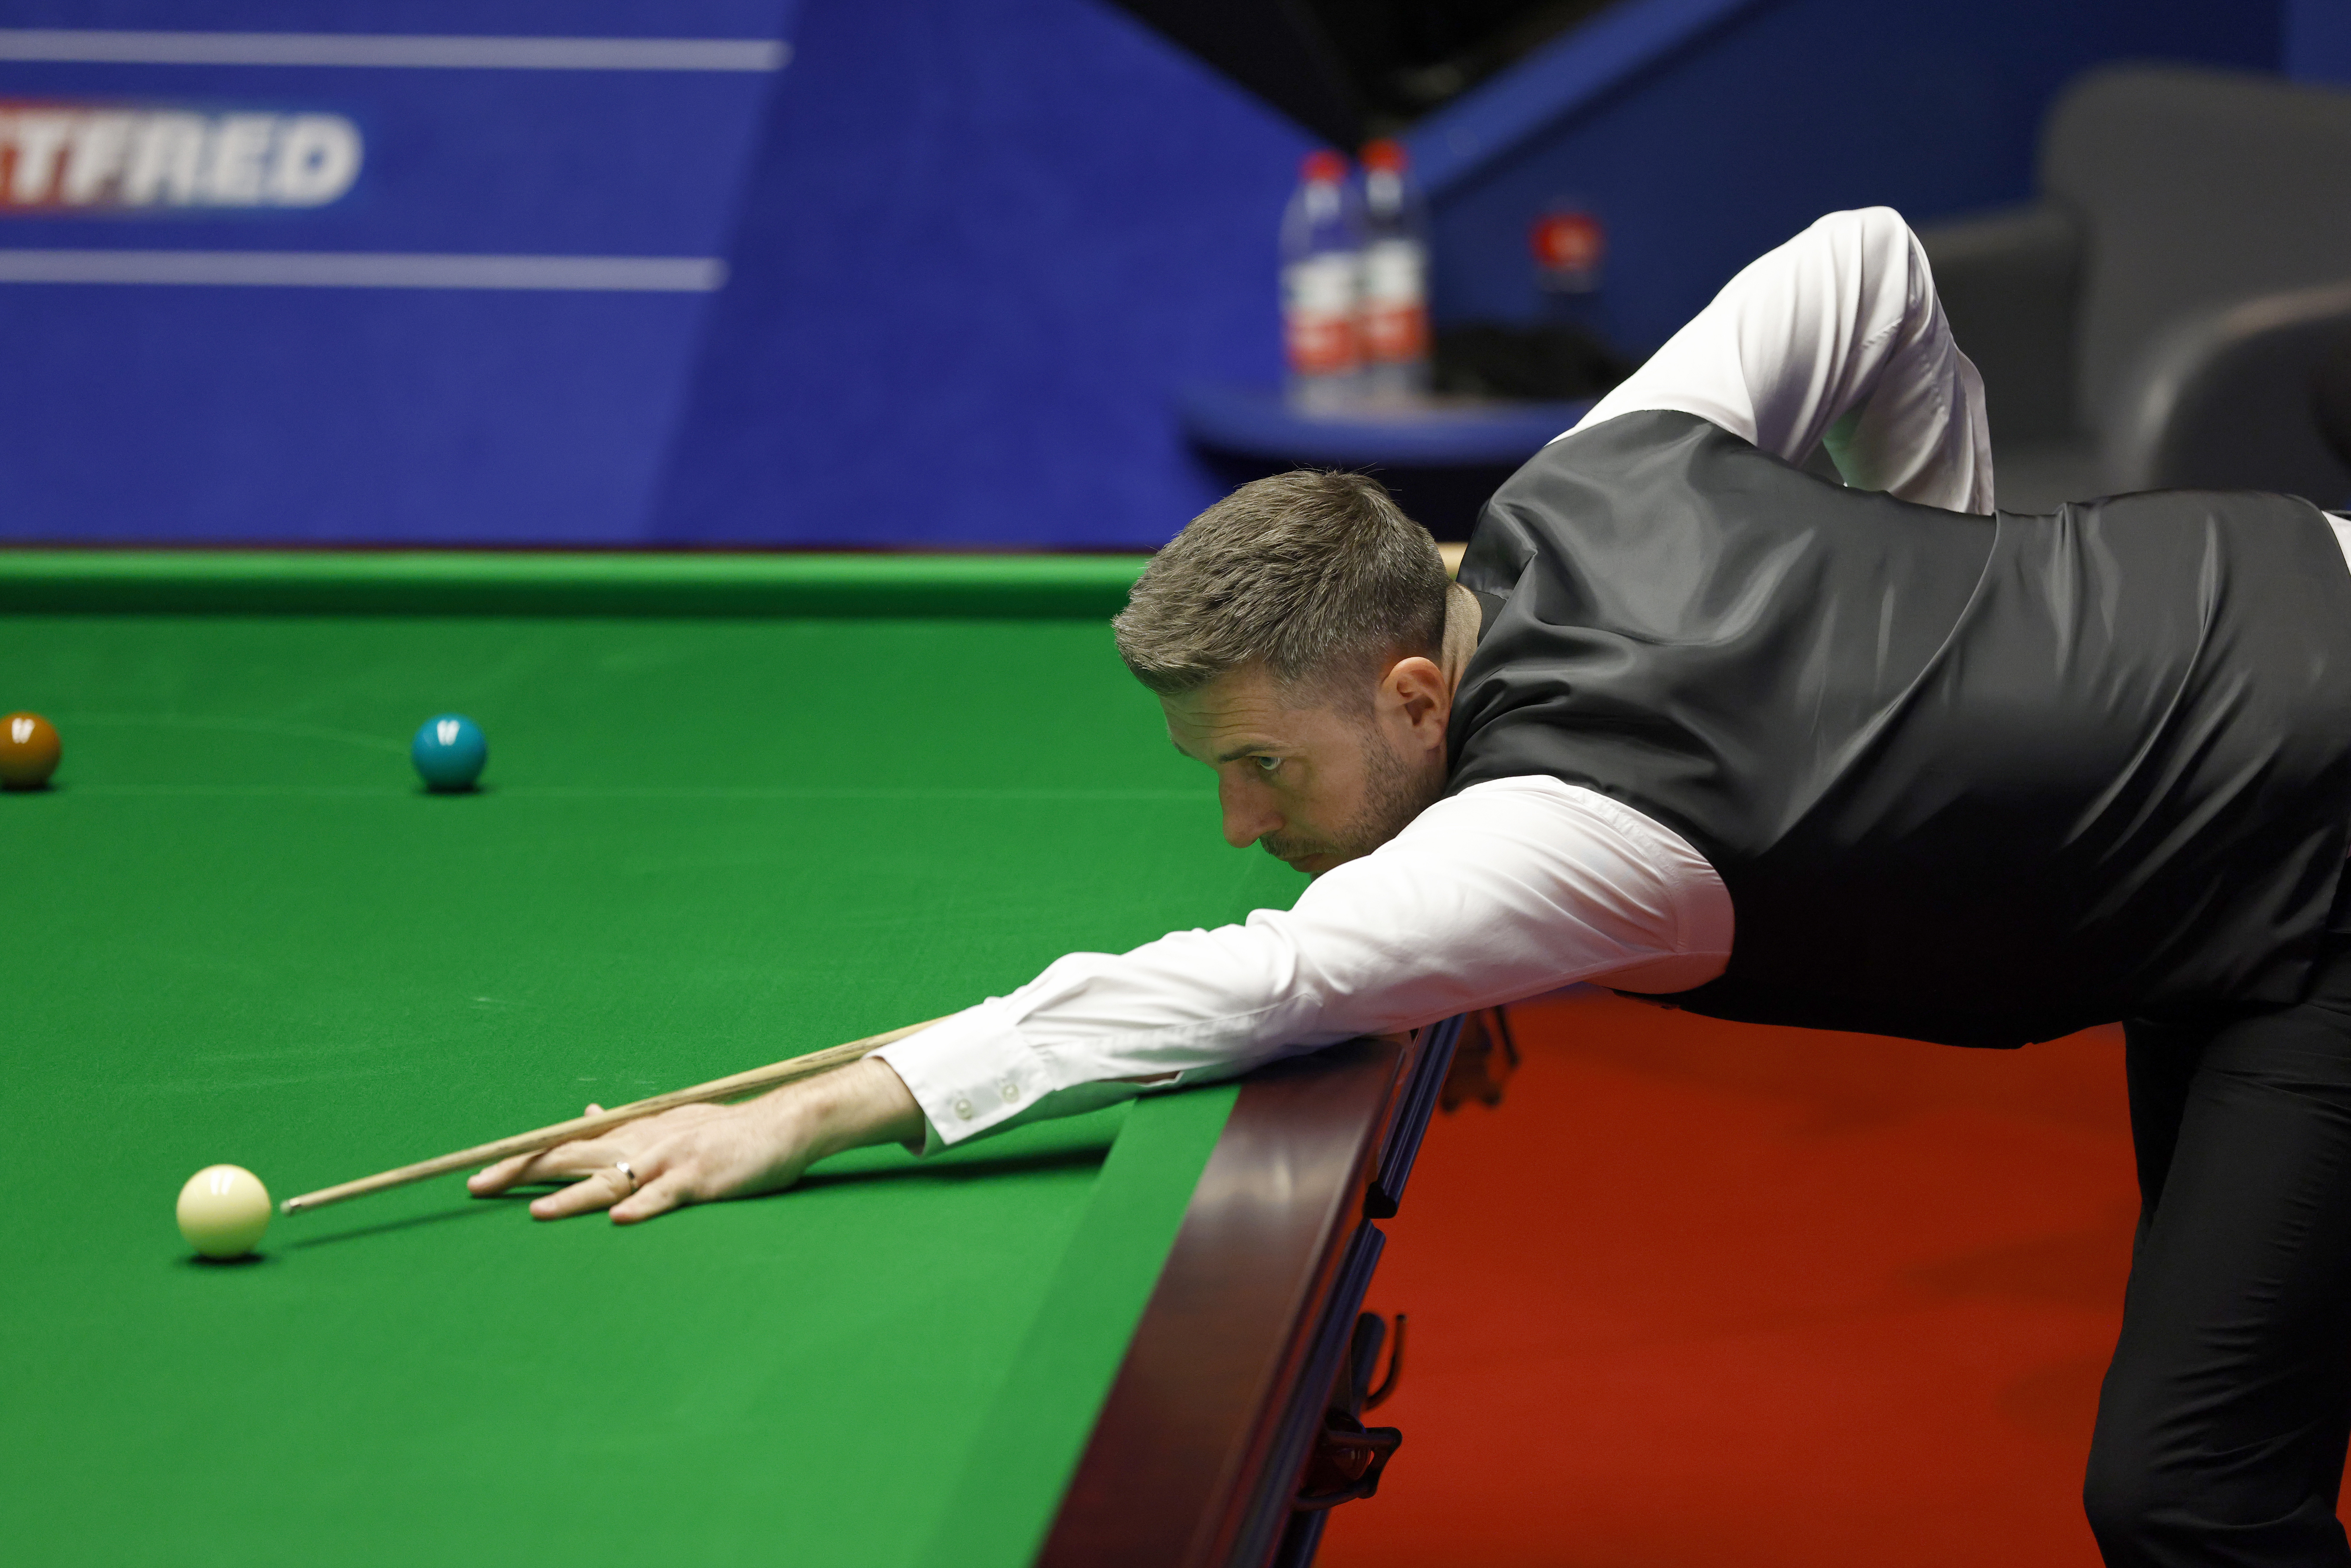 World snooker results Mark Selby reaches round two as Ronnie OSullivan bounces back to take commanding lead over David Gilbert